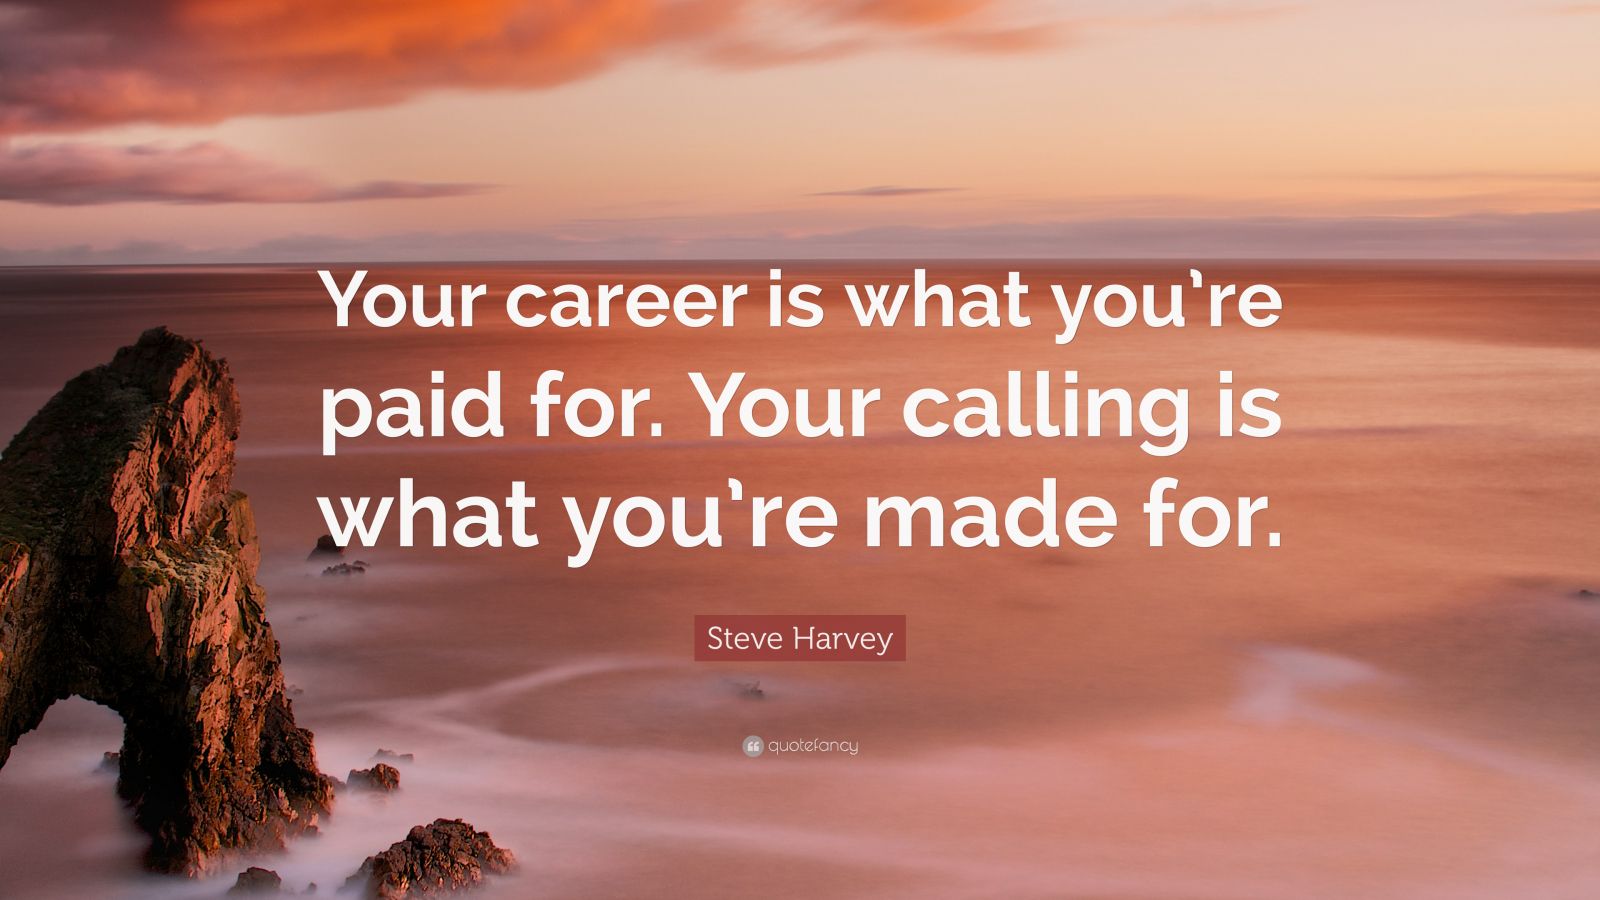 4715647 Steve Harvey Quote Your career is what you re paid for Your